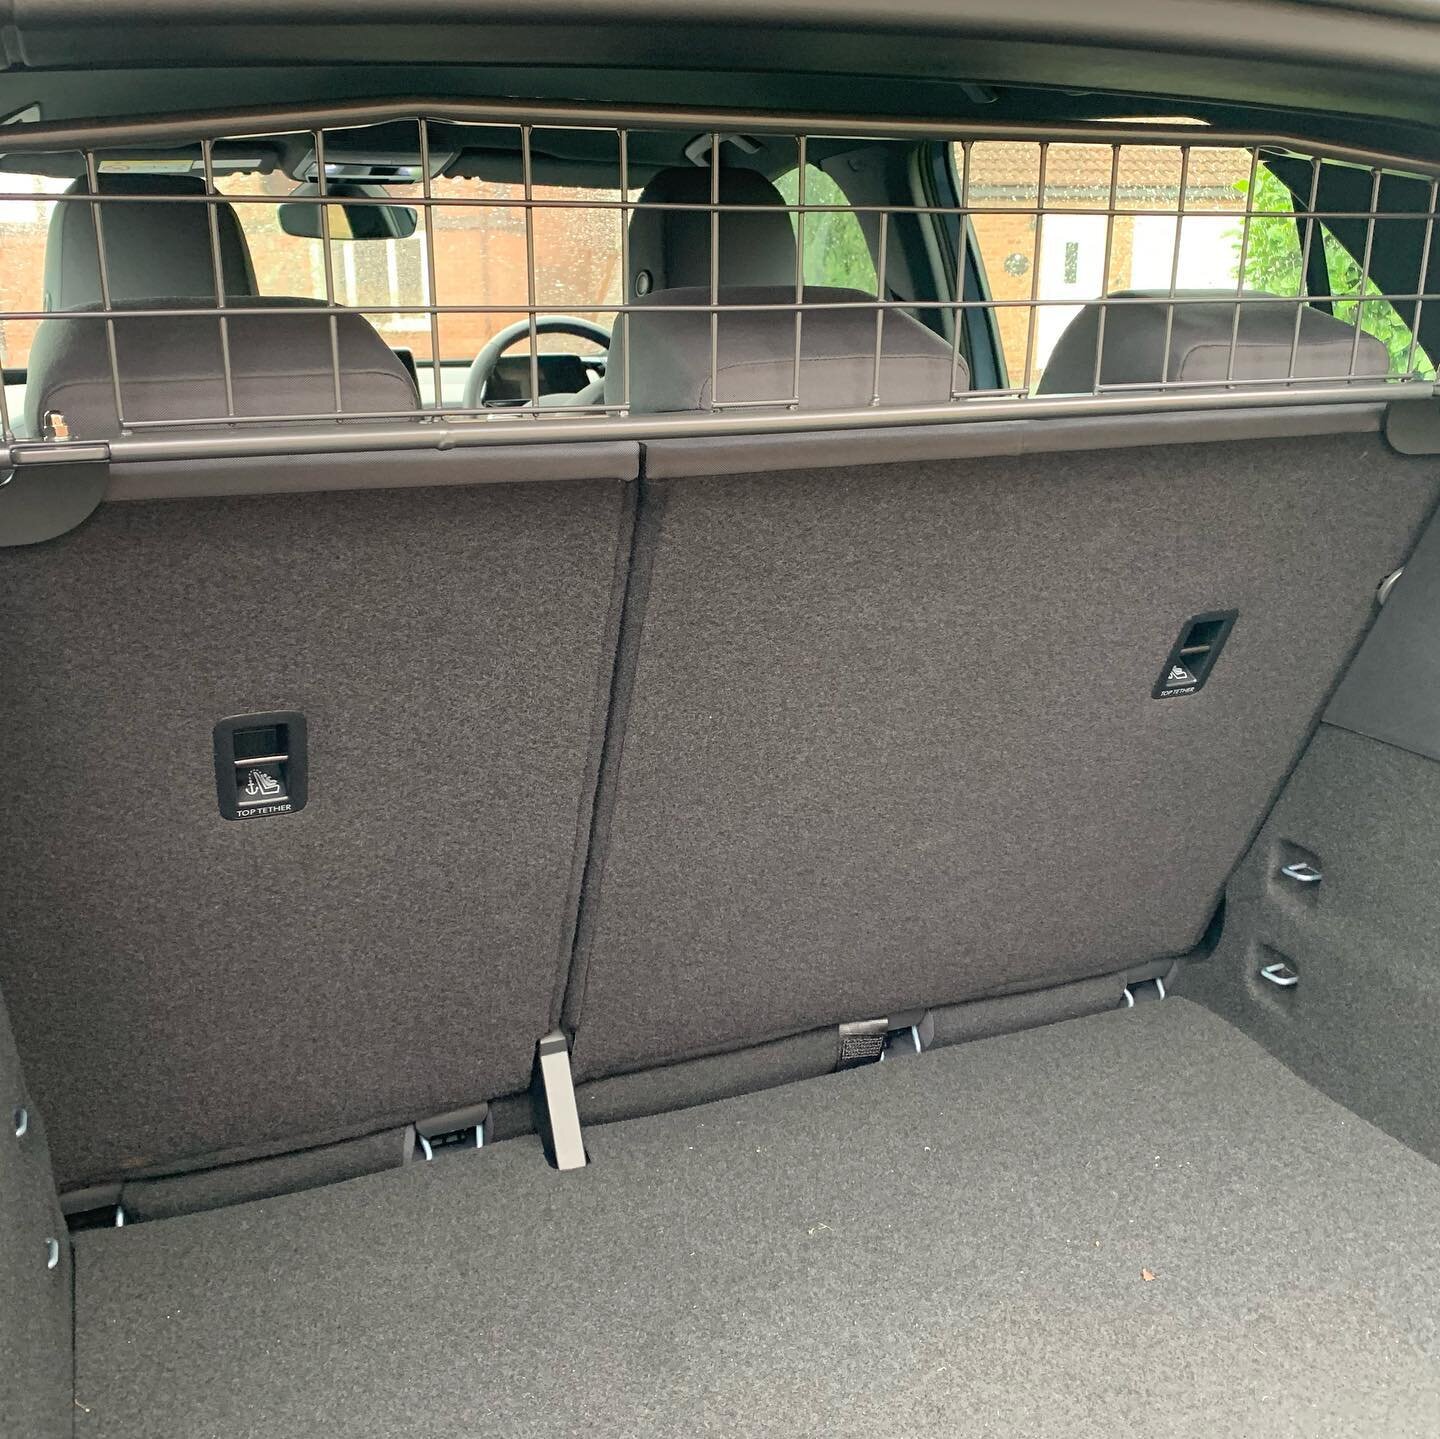 We were delighted to be asked by our partners Travall to test out their first pre production dog guard designed specifically for VW ID3. We were very pleased with the ease of fitment and the high quality finish. These will be available in around 8 we